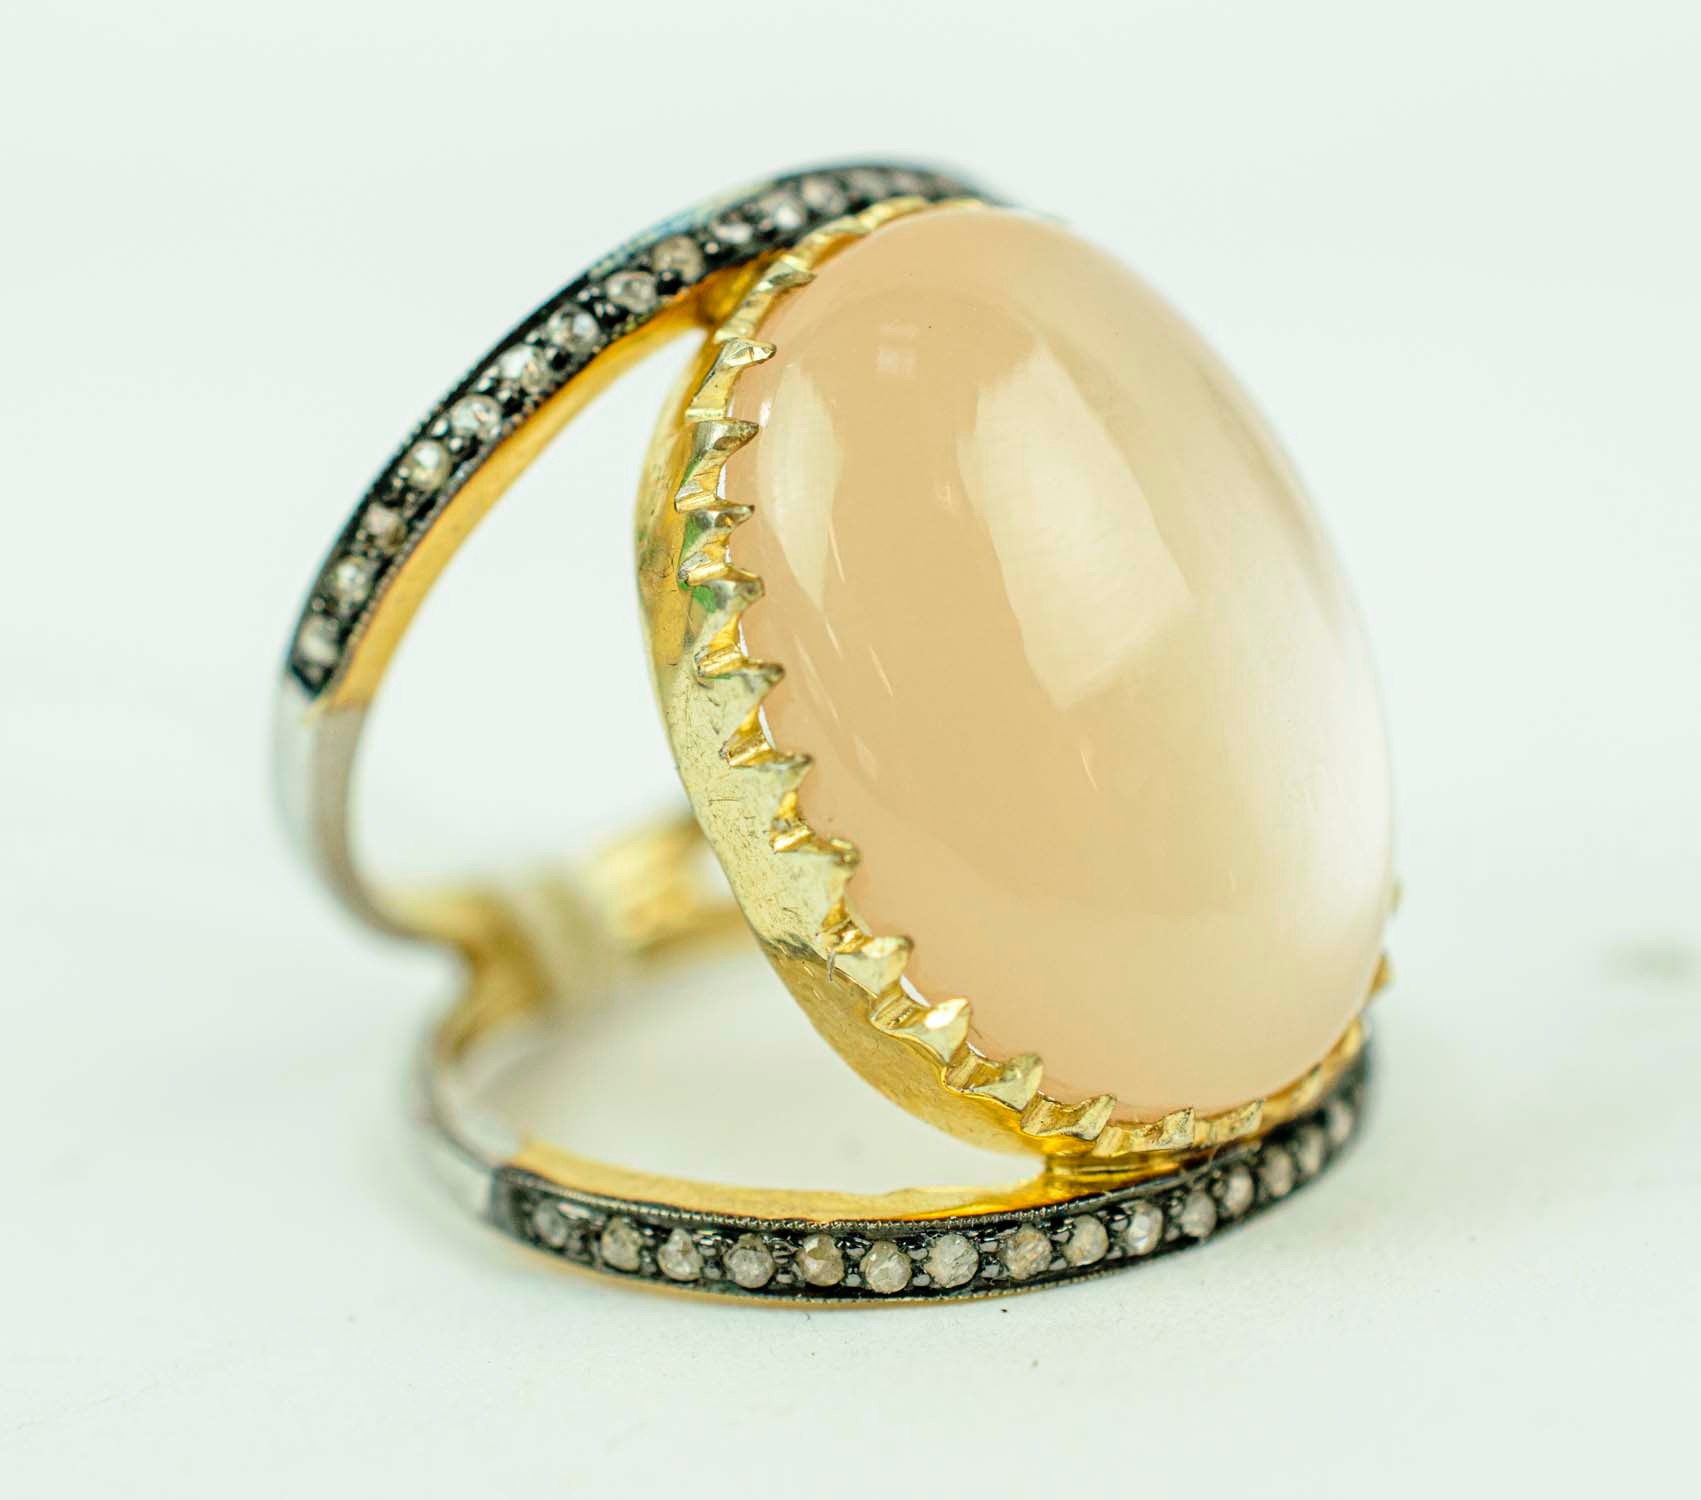 A CABOUCHON AND DIAMOND DRESS RING, set with a moonstone coloured cabouchon of approximately 14.70